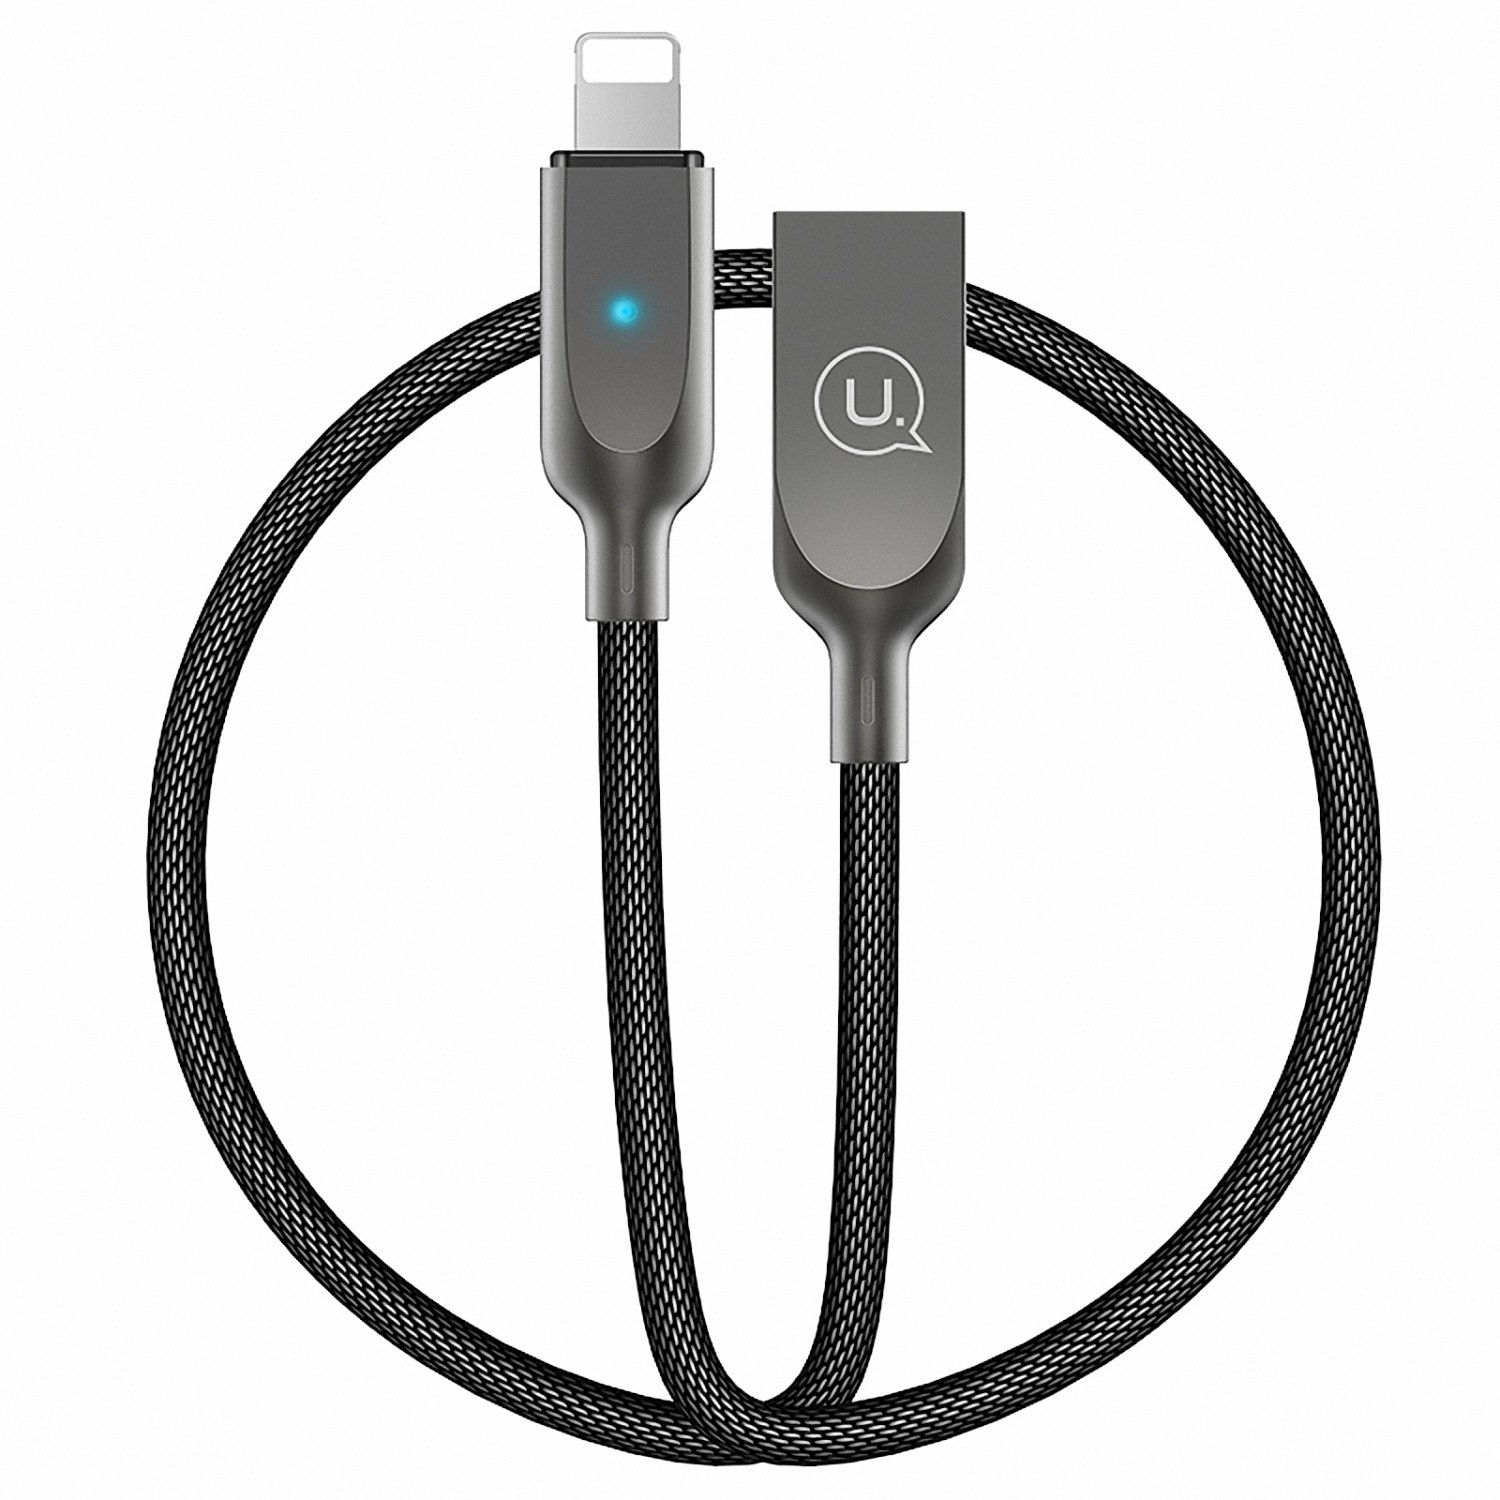 Disconnected USB cable